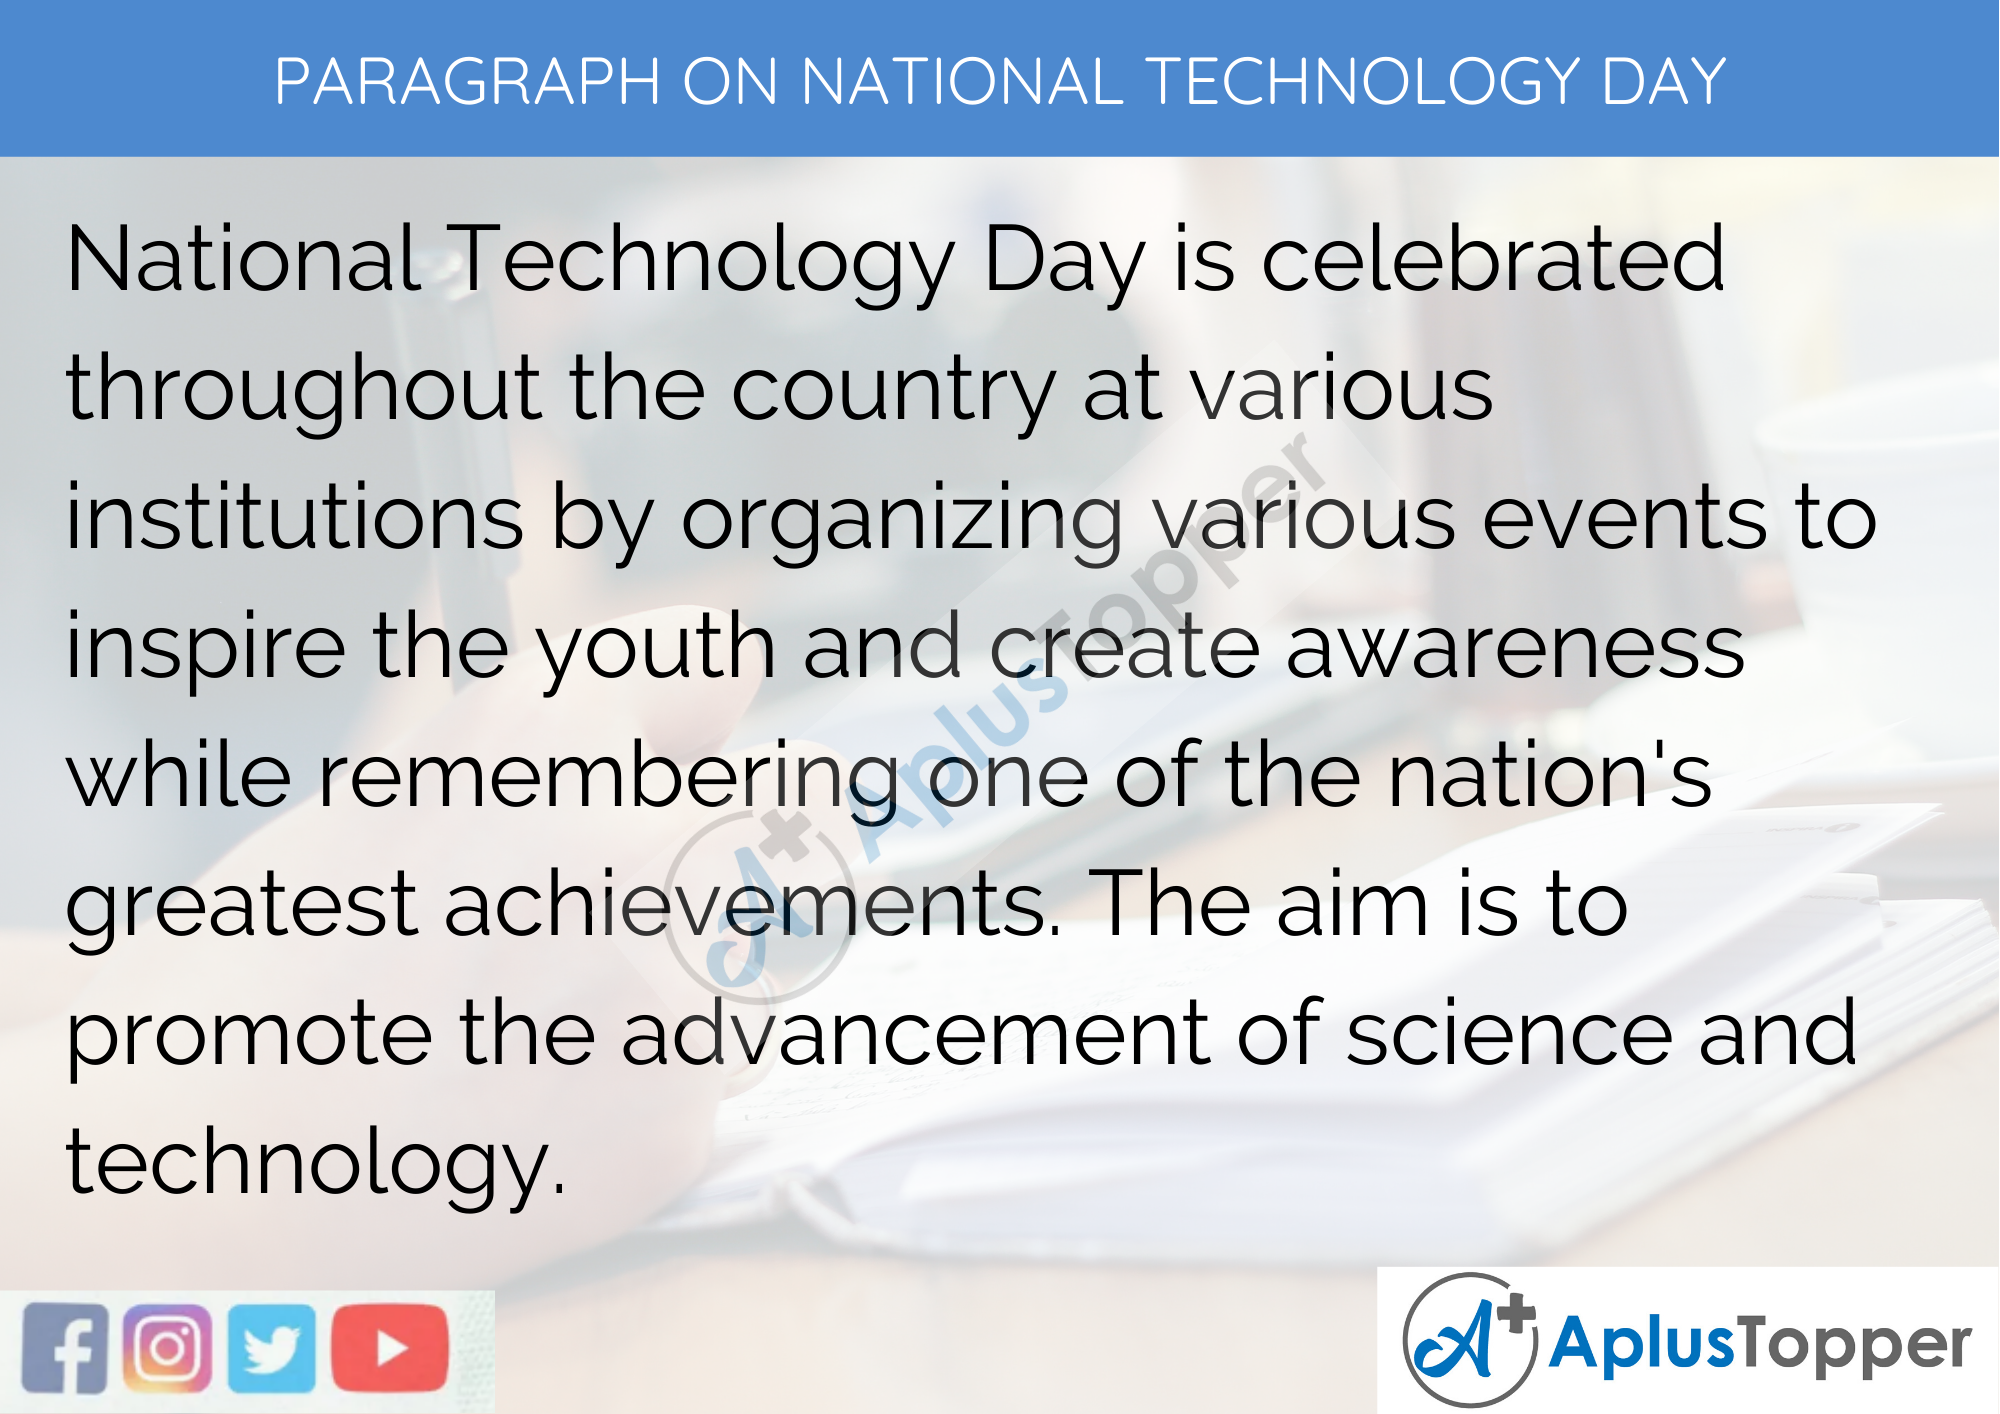 Paragraph On National Technology Day - 250 to 300 Words for Classes 9, 10, 11, and 12, And Competitive Exam Aspirants